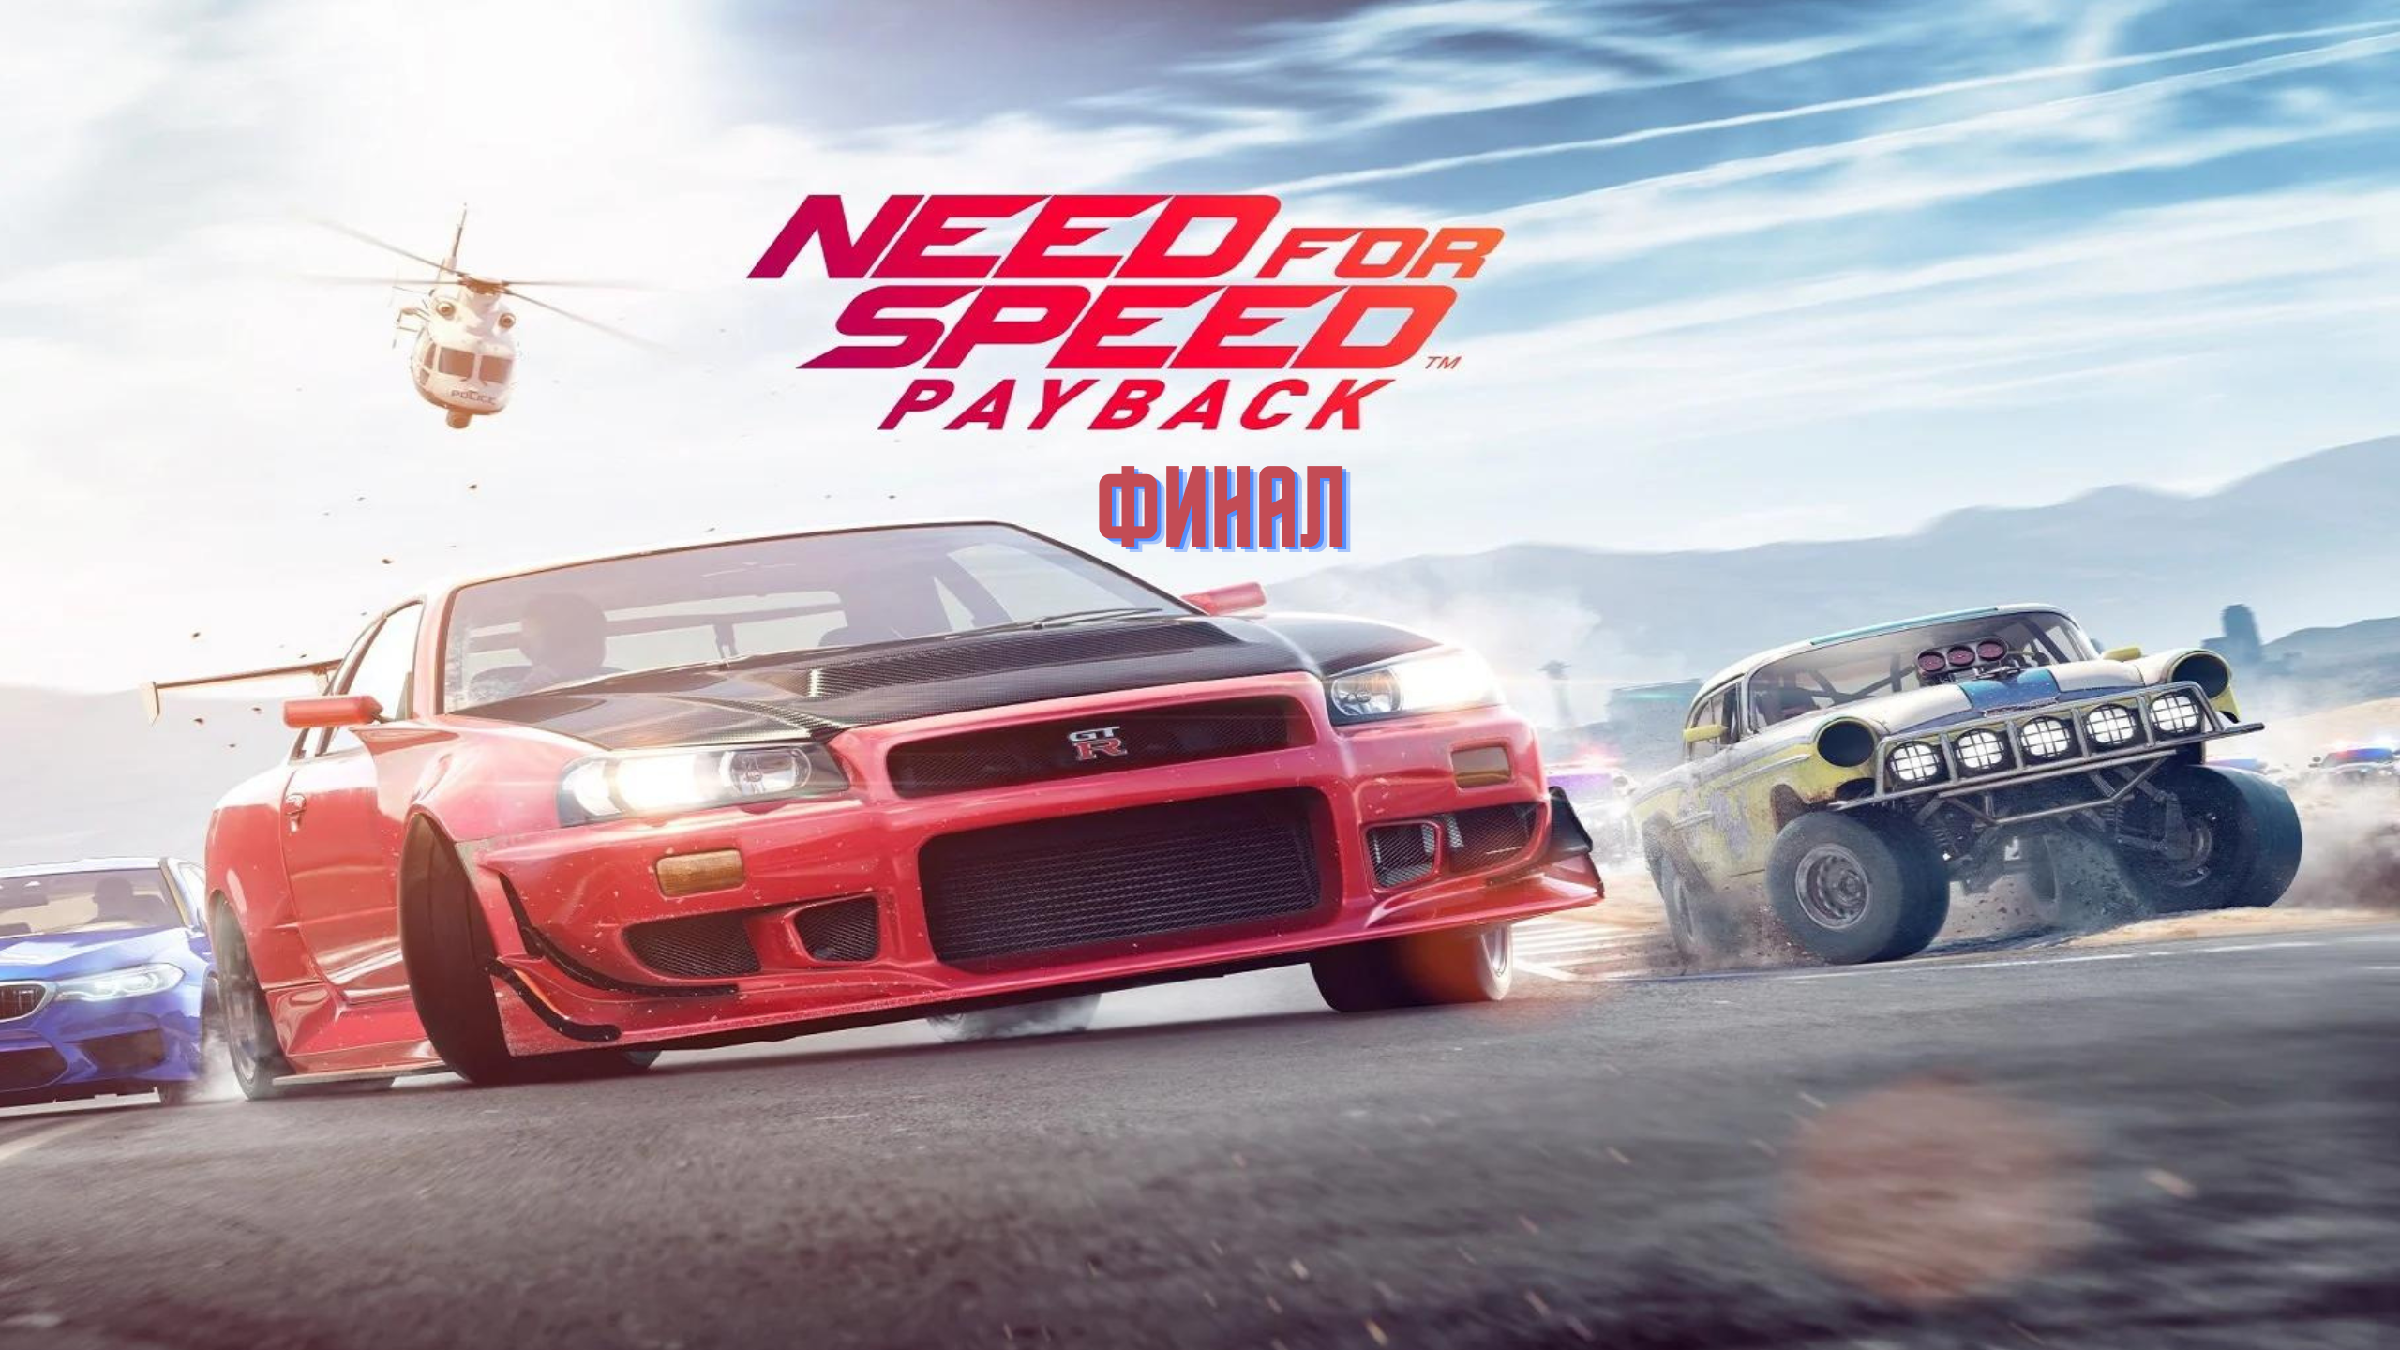 Need for speed playback. Need for Speed: Payback. Need for Speed™ Payback - издание Deluxe. Картинки need for Speed Payback. Need for Speed: Payback (2017).